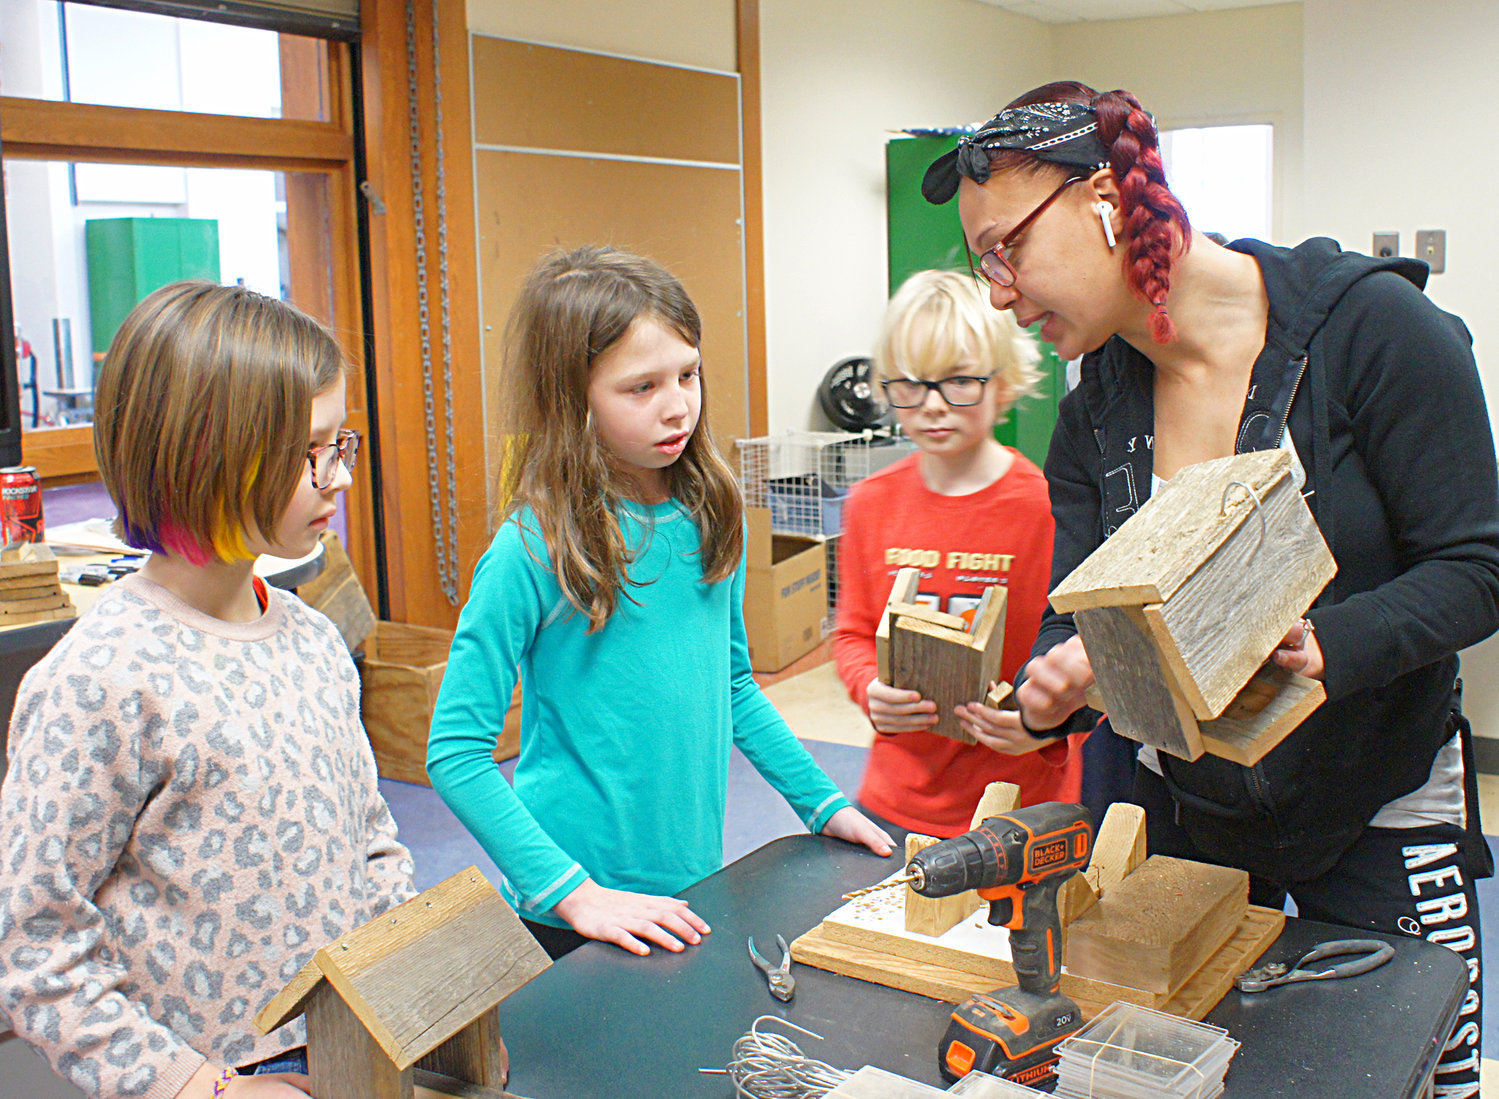 How do you make a birdfeeder? Students from Lake Harriet Community School Upper Campus build their own from reclaimed wood on Thursday, Feb. 9, 2023. Elpis  Community Programs Coordinator LaShay DeClerq-Ransom explains the drilling-the-hanger-wire-hole stage of birdfeeder construction as (left to right) Izzy Spallino, Kennedy Kaplan, and Atticus Donald watch. They also learned about the importance of birds in the environment and how to identify birds. (Photo by Terry Faust)